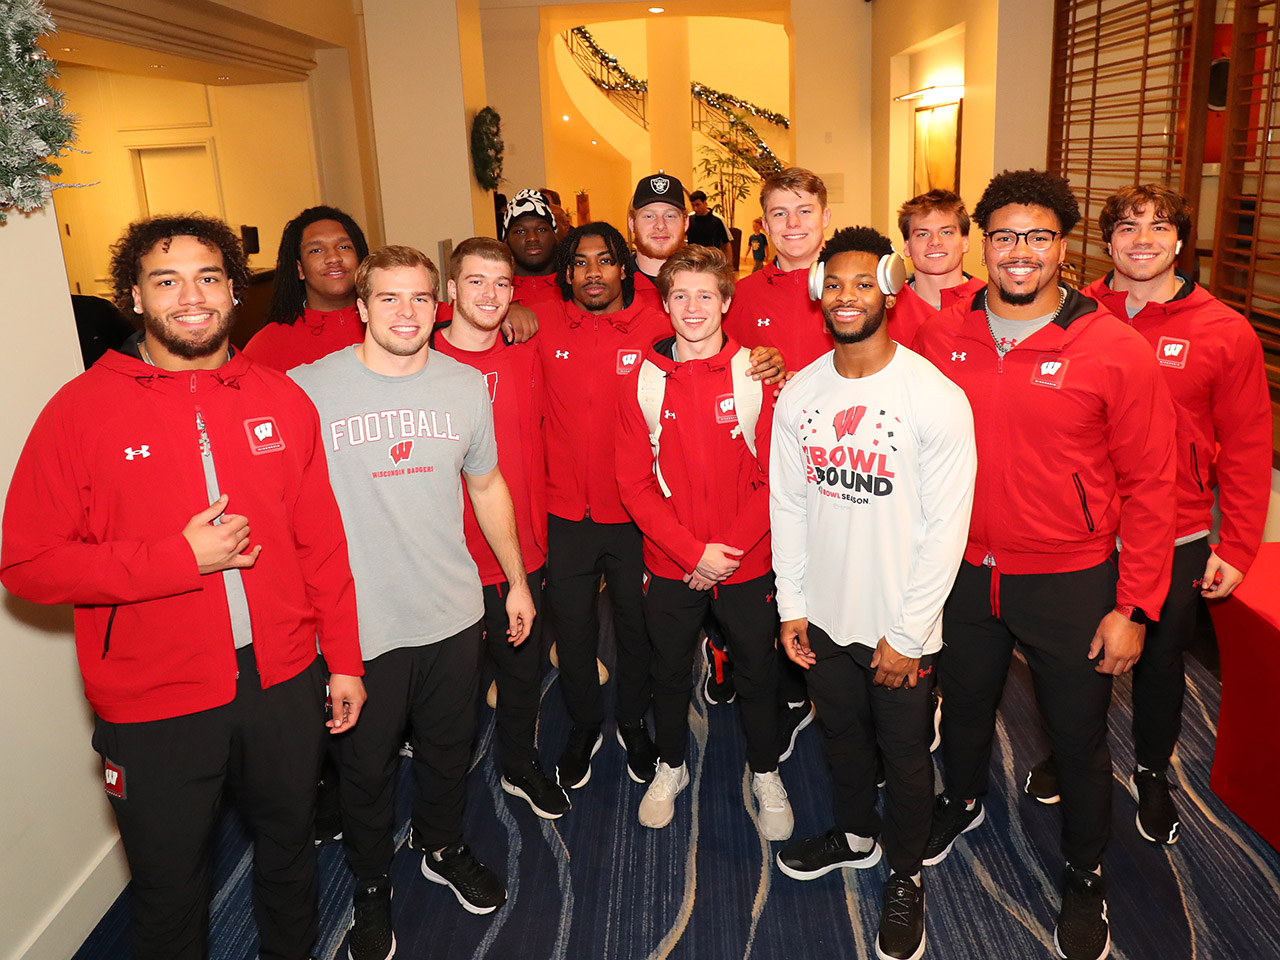 Wisconsin players are staying at the Grand Hyatt Tampa Bay while preparing for the ReliaQuest Bowl